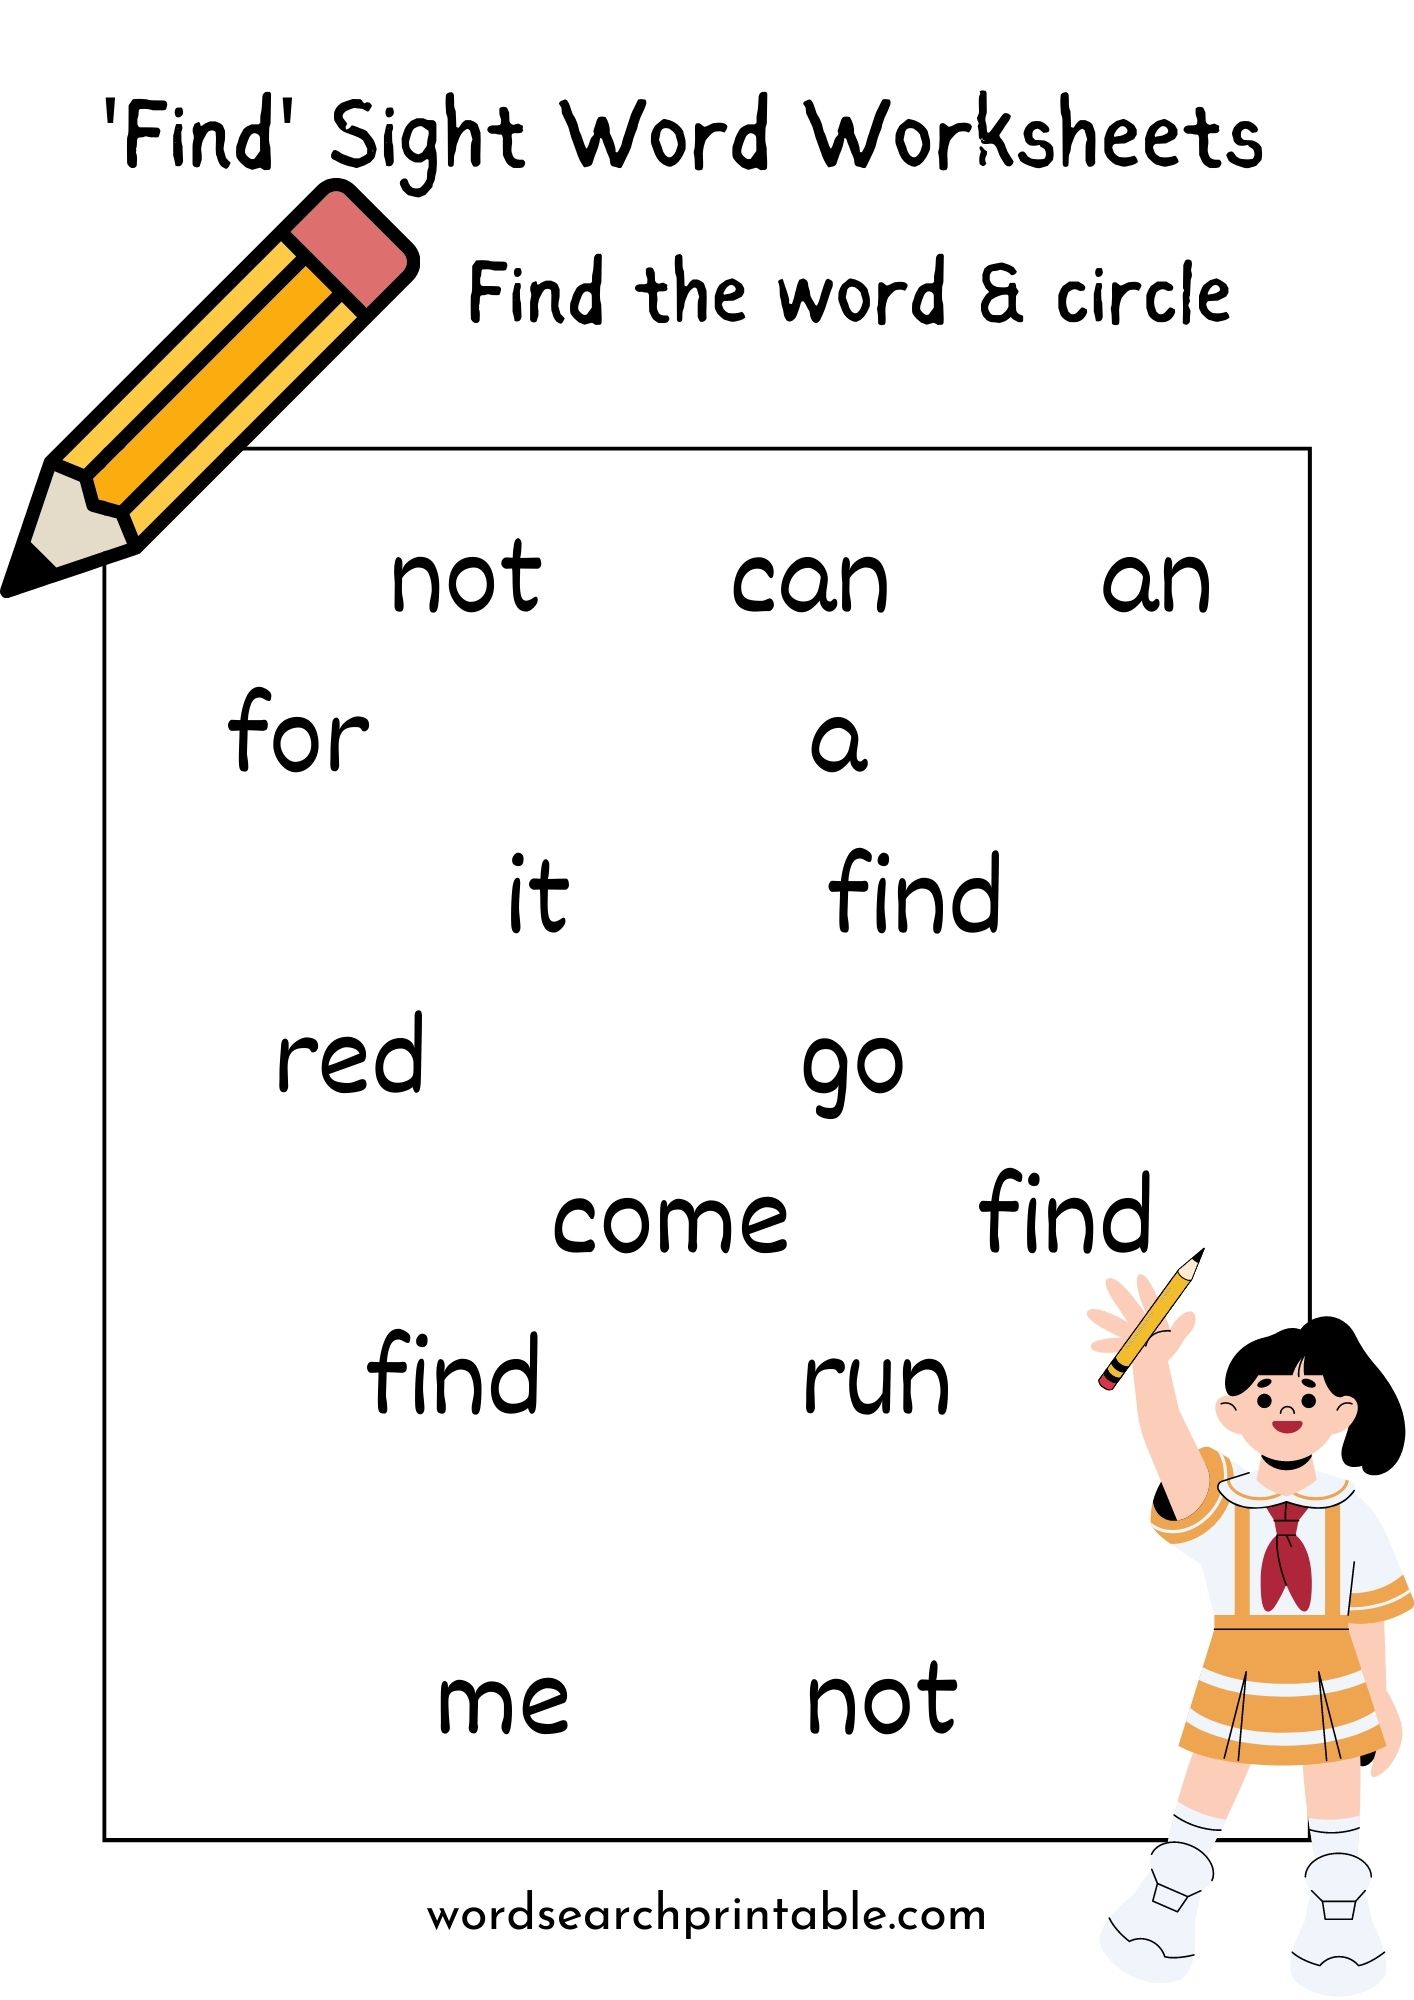 Find the sight word Find and circle it